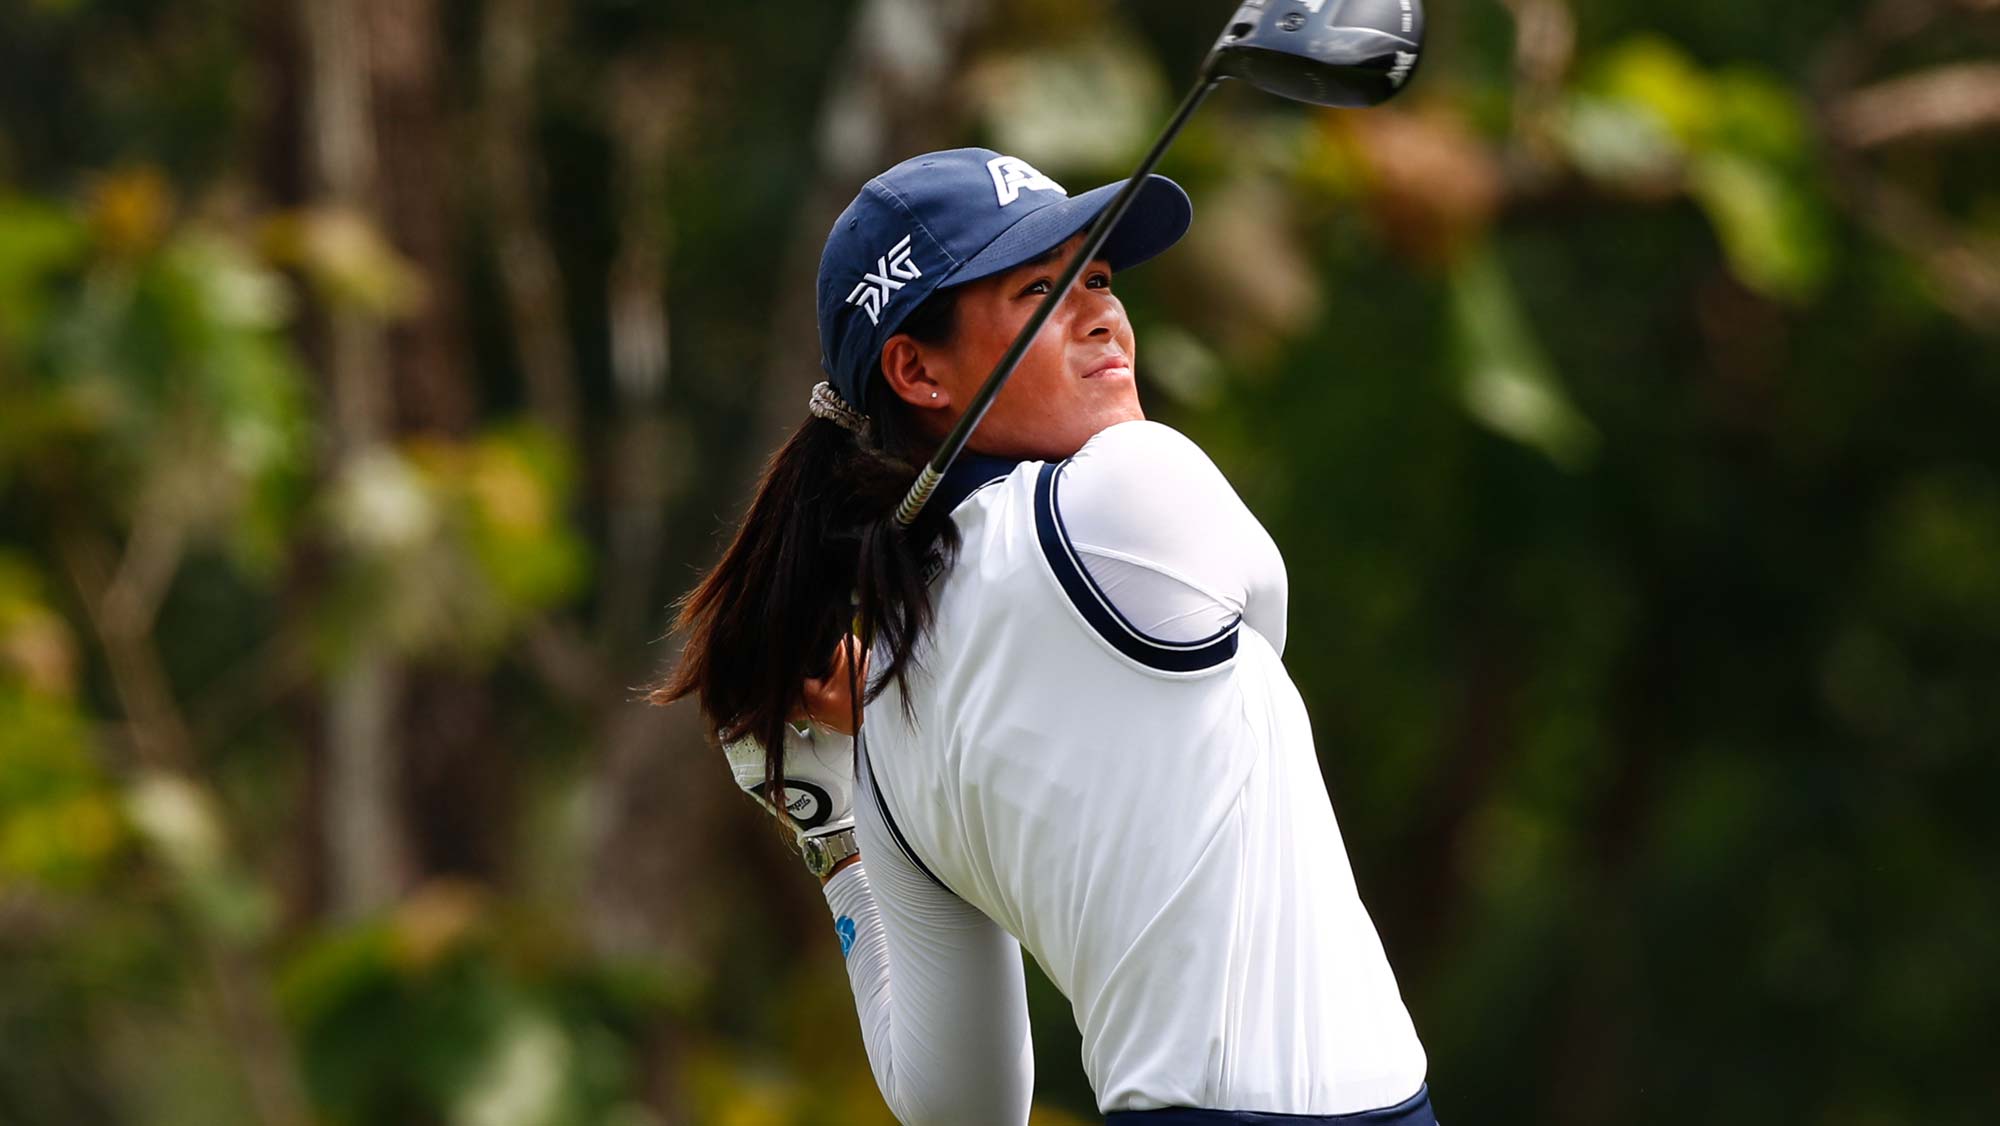 Celine Boutier of France tees off at the 2nd hole during the first round of Honda LPGA Thailand